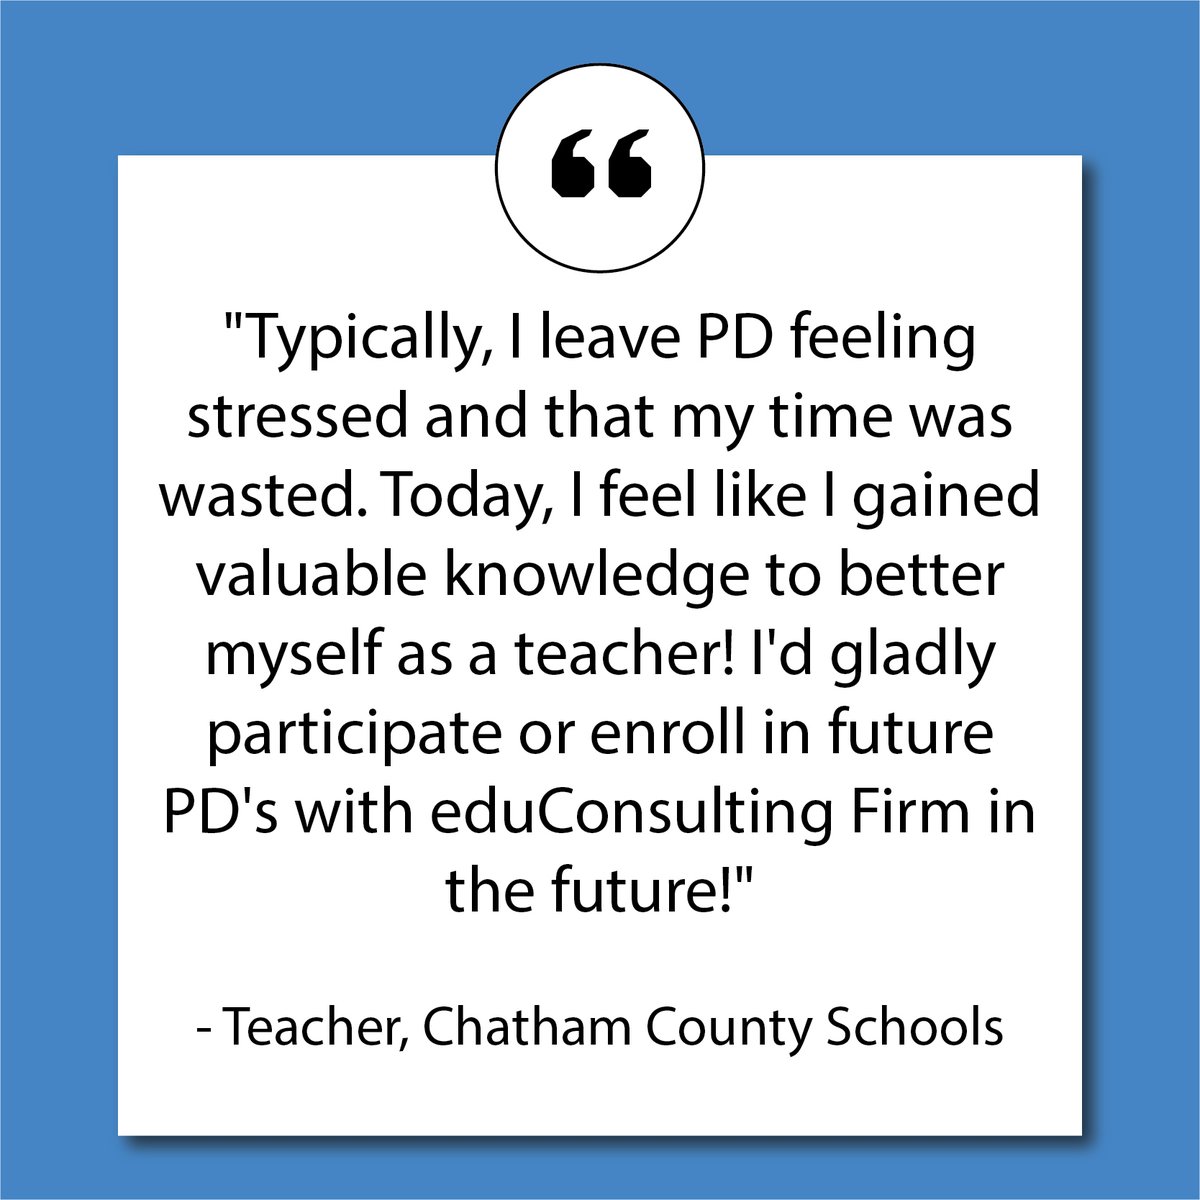 #ThursdayTestimonial

'Typically, I leave PD feeling stressed and that my time was wasted. Today, I feel like I gained valuable knowledge to better myself as a teacher! I'd gladly participate or enroll in future PD's with eduConsulting Firm in the future!' -Teacher, Chatham C...